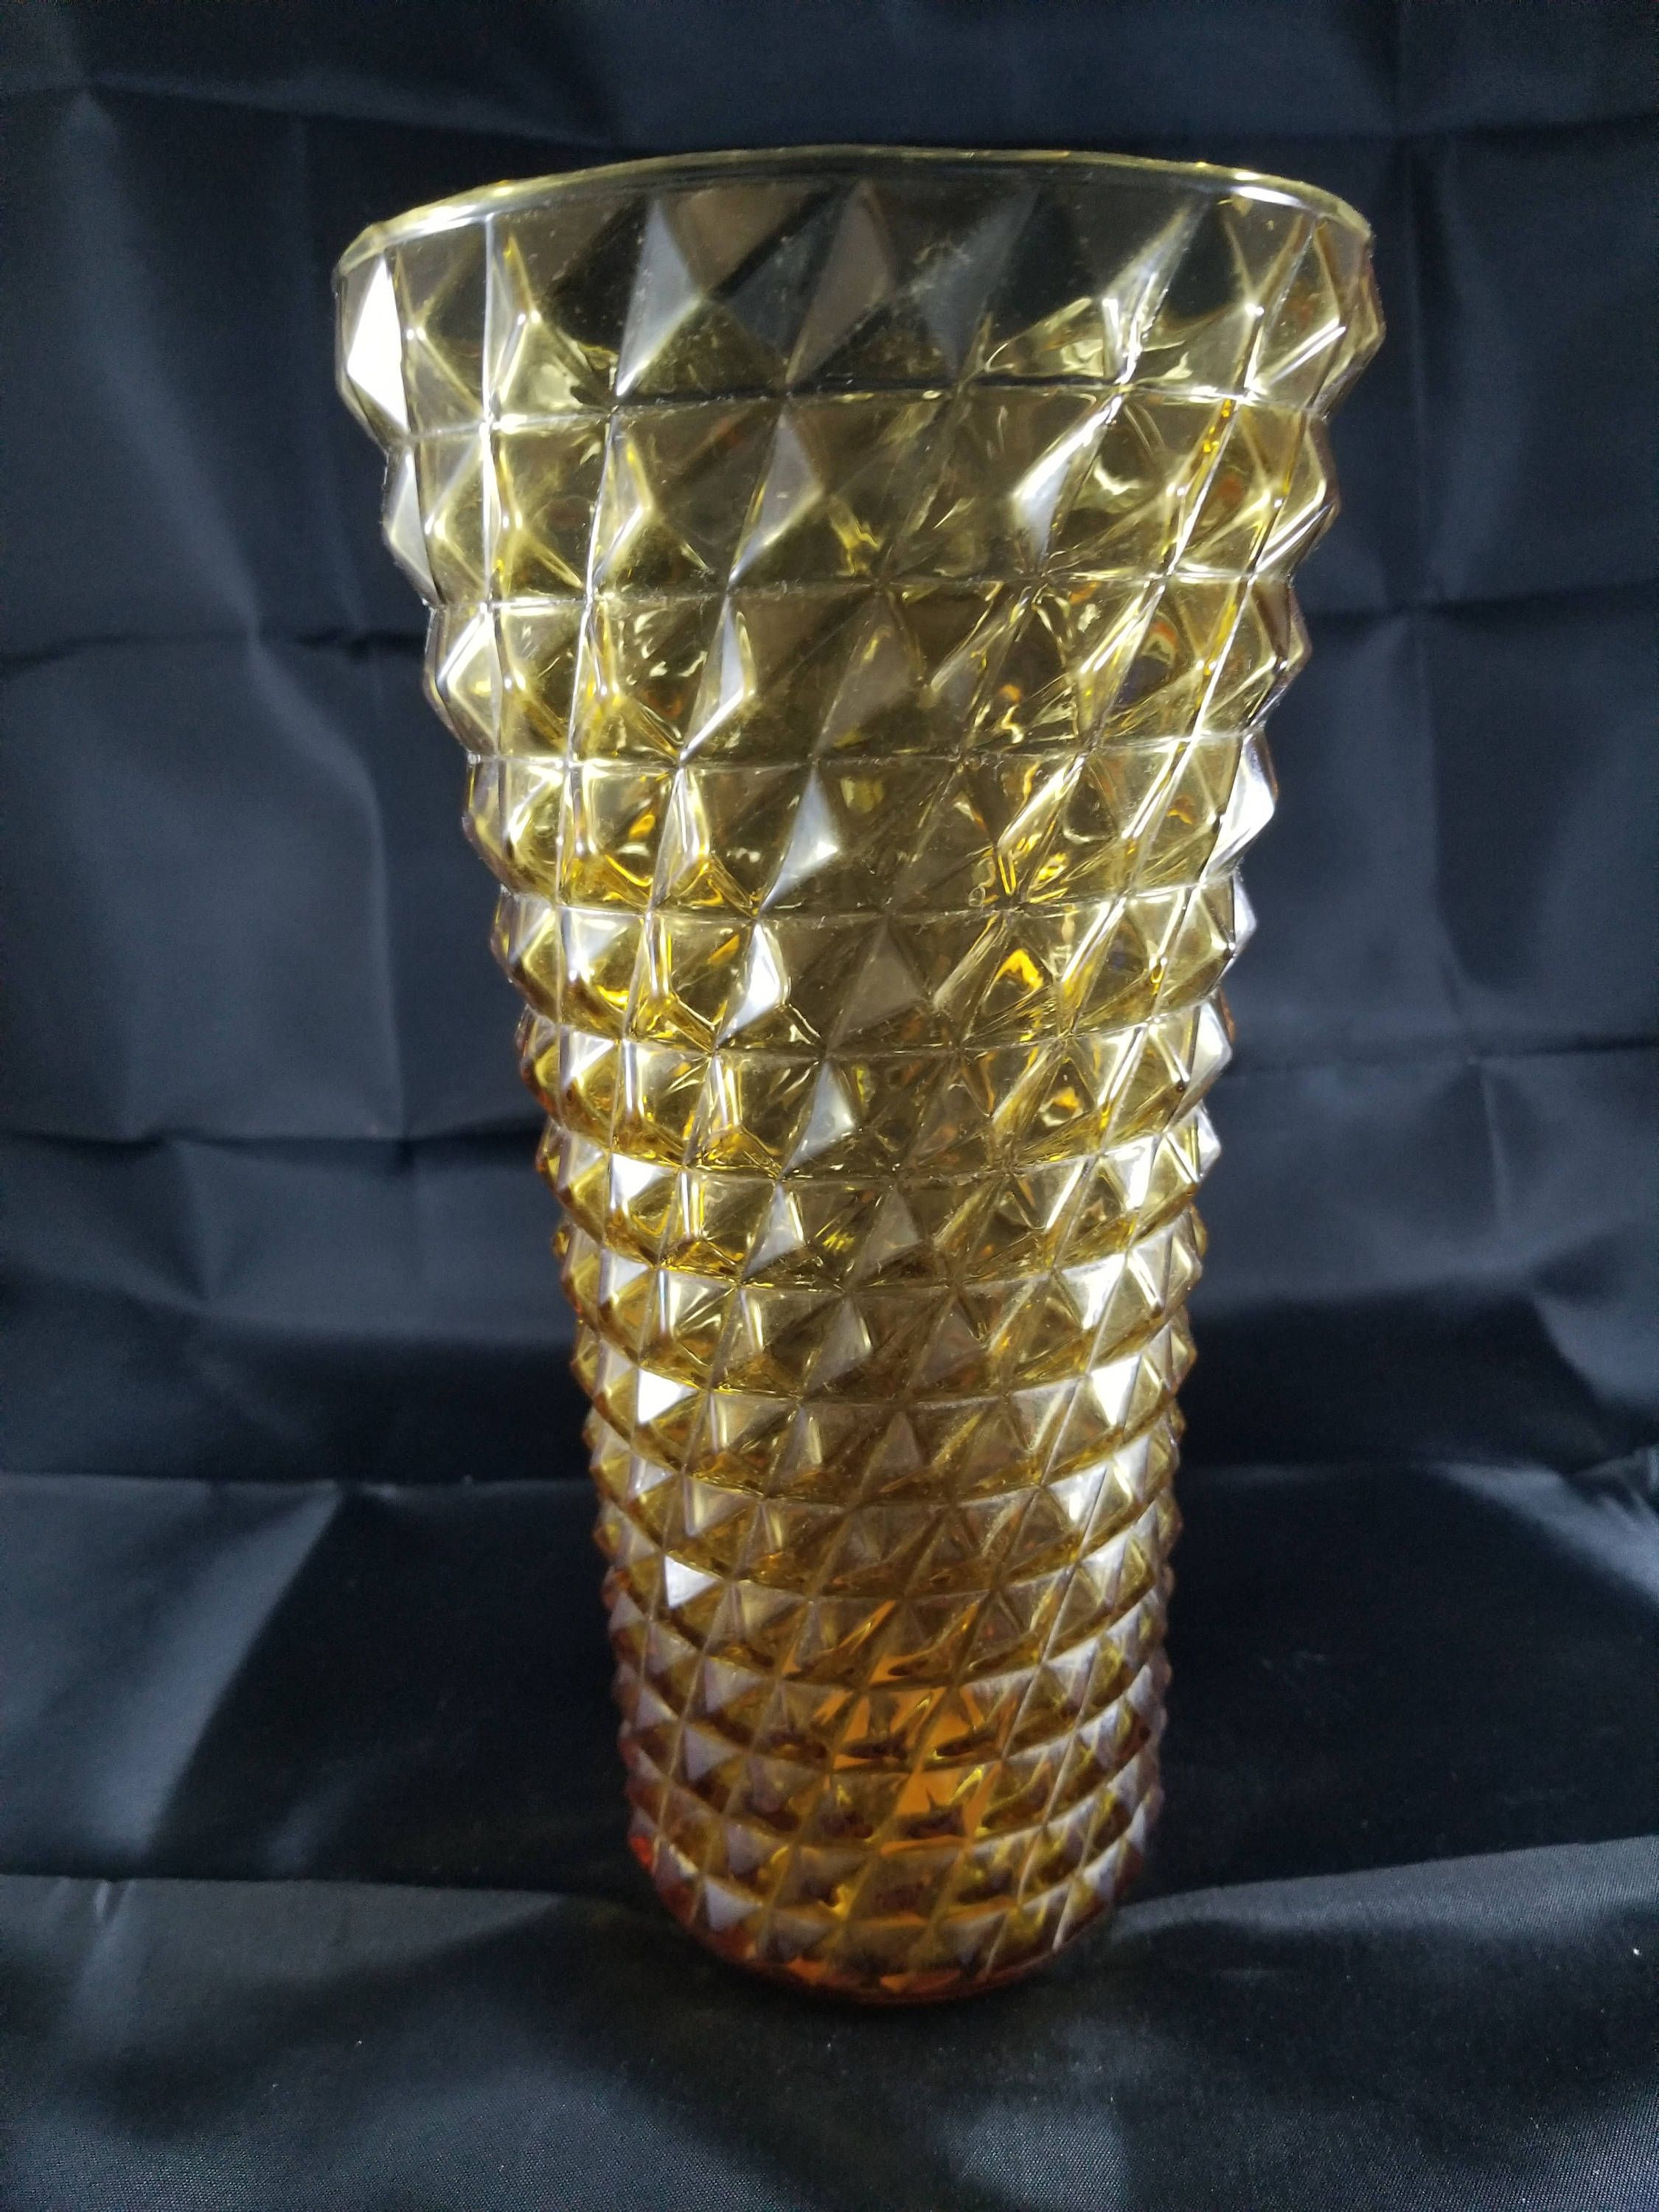 tall brass vase of large rare vintage rossini genuine empoli glass amber hobnail italy within large rare vintage rossini genuine empoli glass amber hobnail italy 9 75 tall 5 50 wide by jksarray on etsy